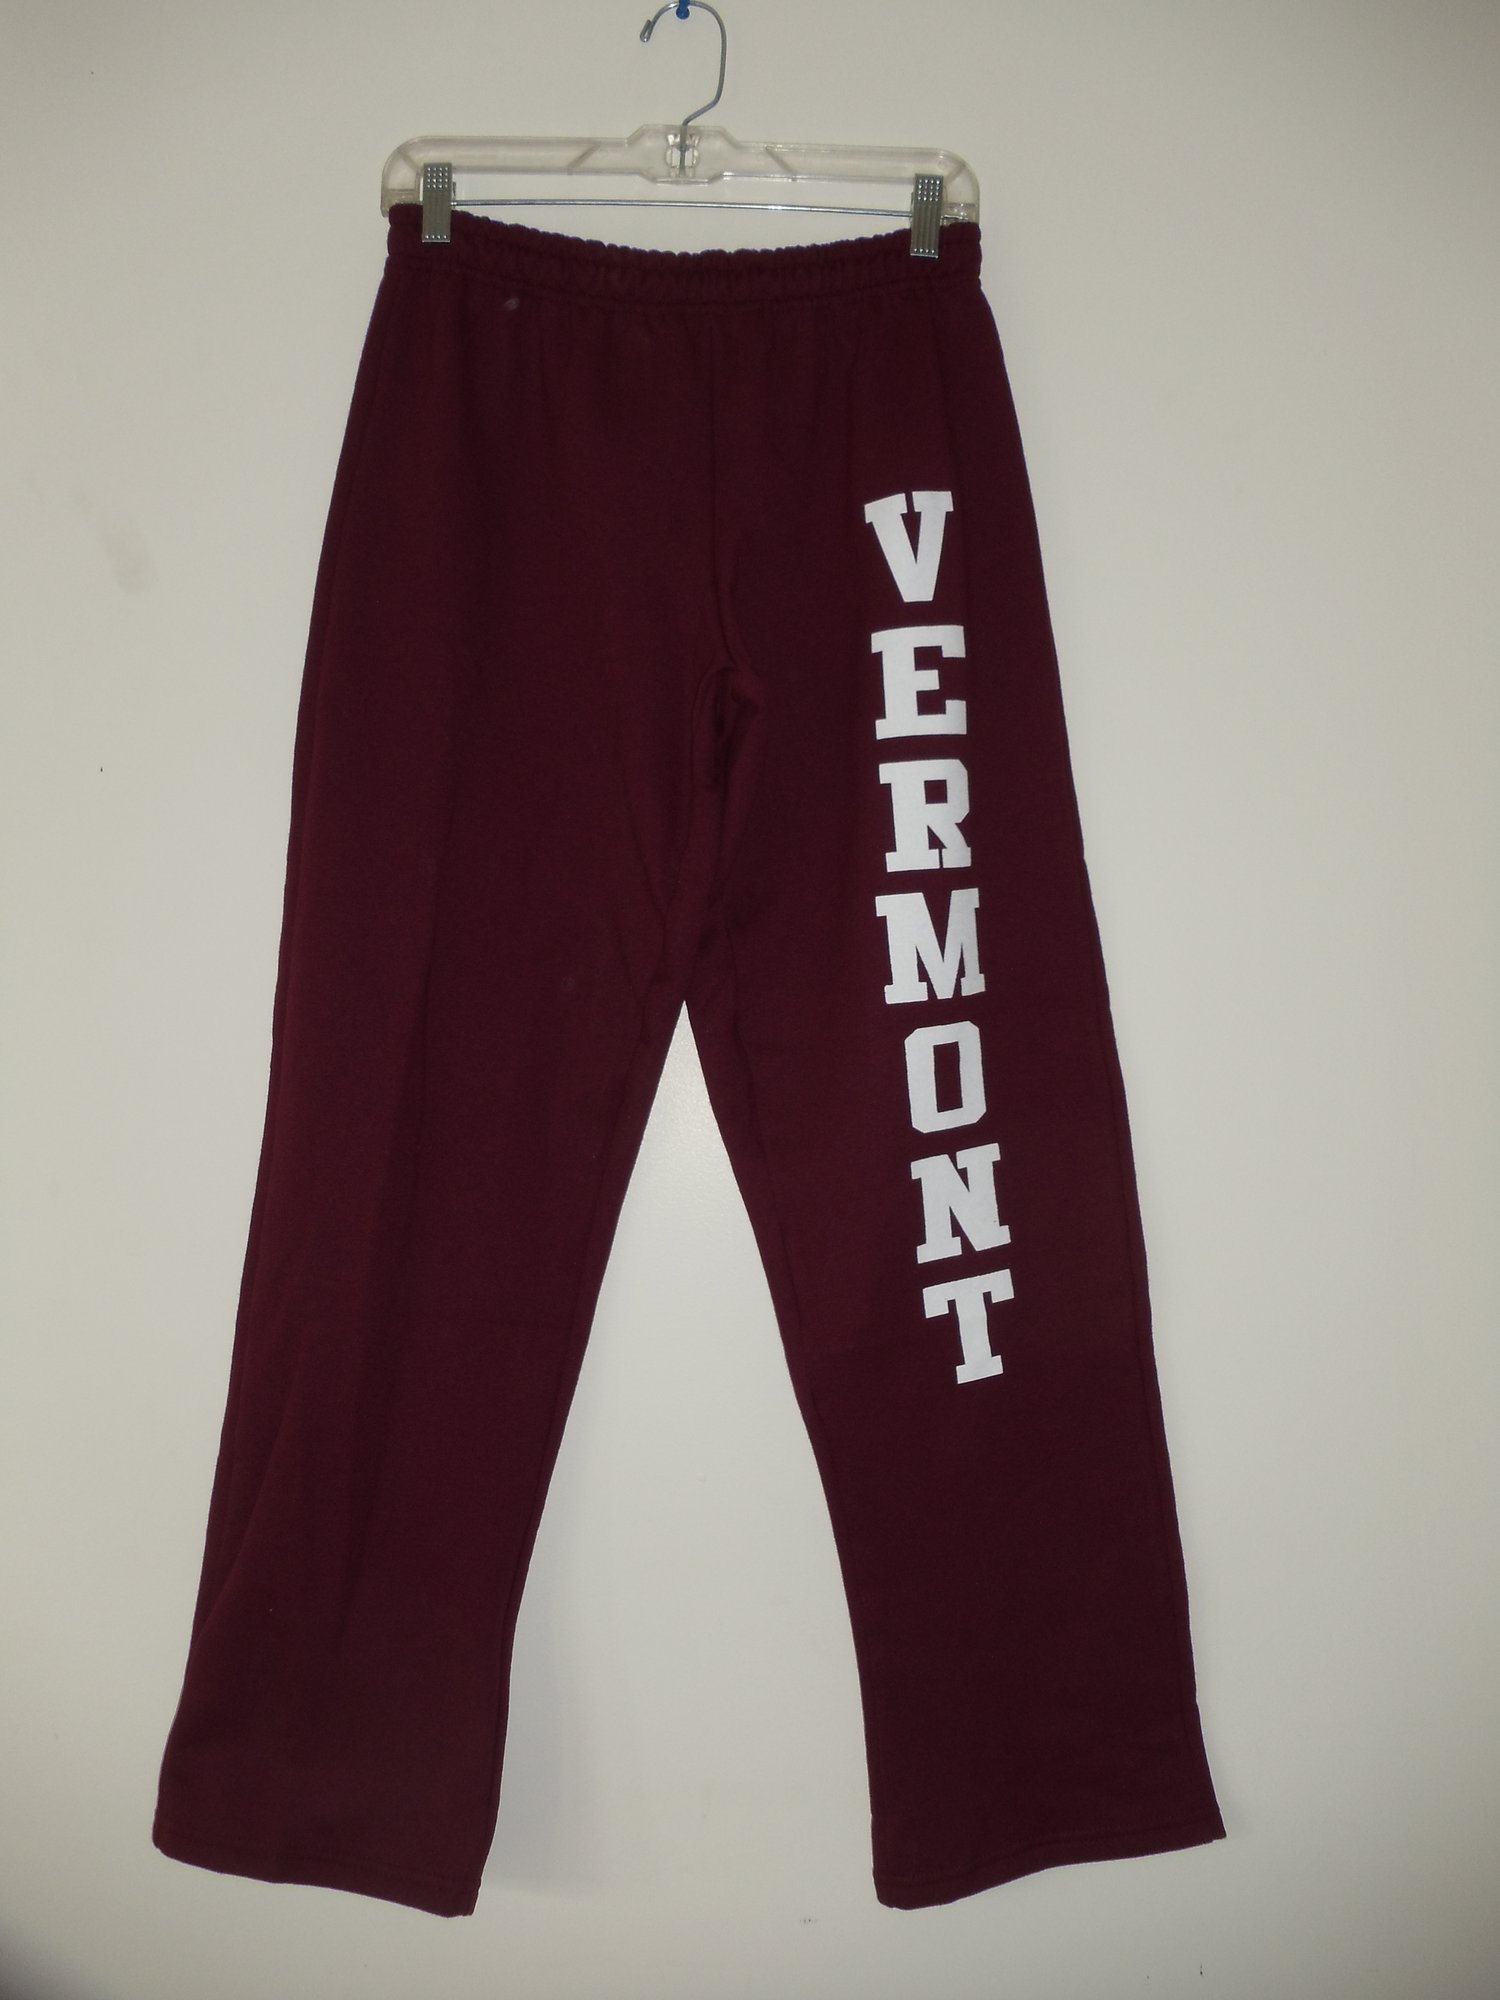 Image of Vermont Sweatpants 8oz - White on Maroon - Vermont clothing - 802 clothing - 802 store